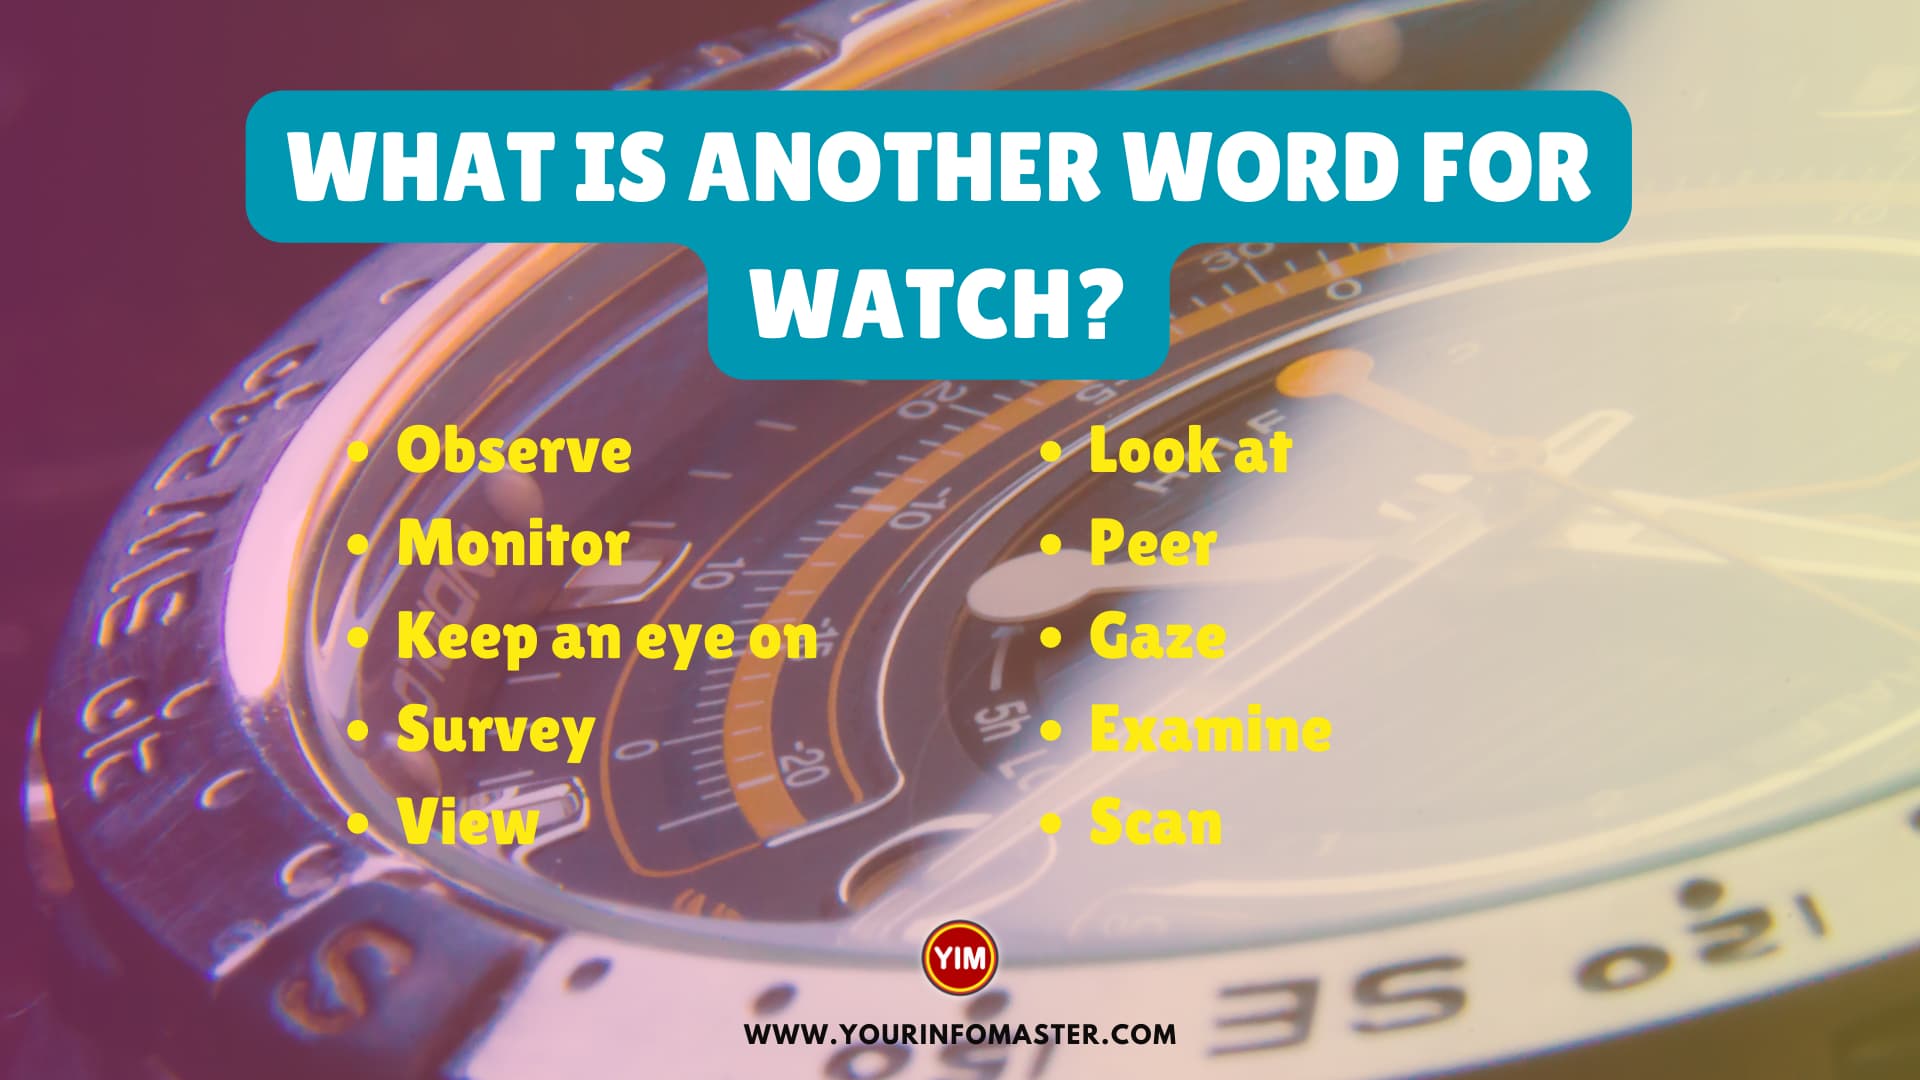 What is another word for Watch